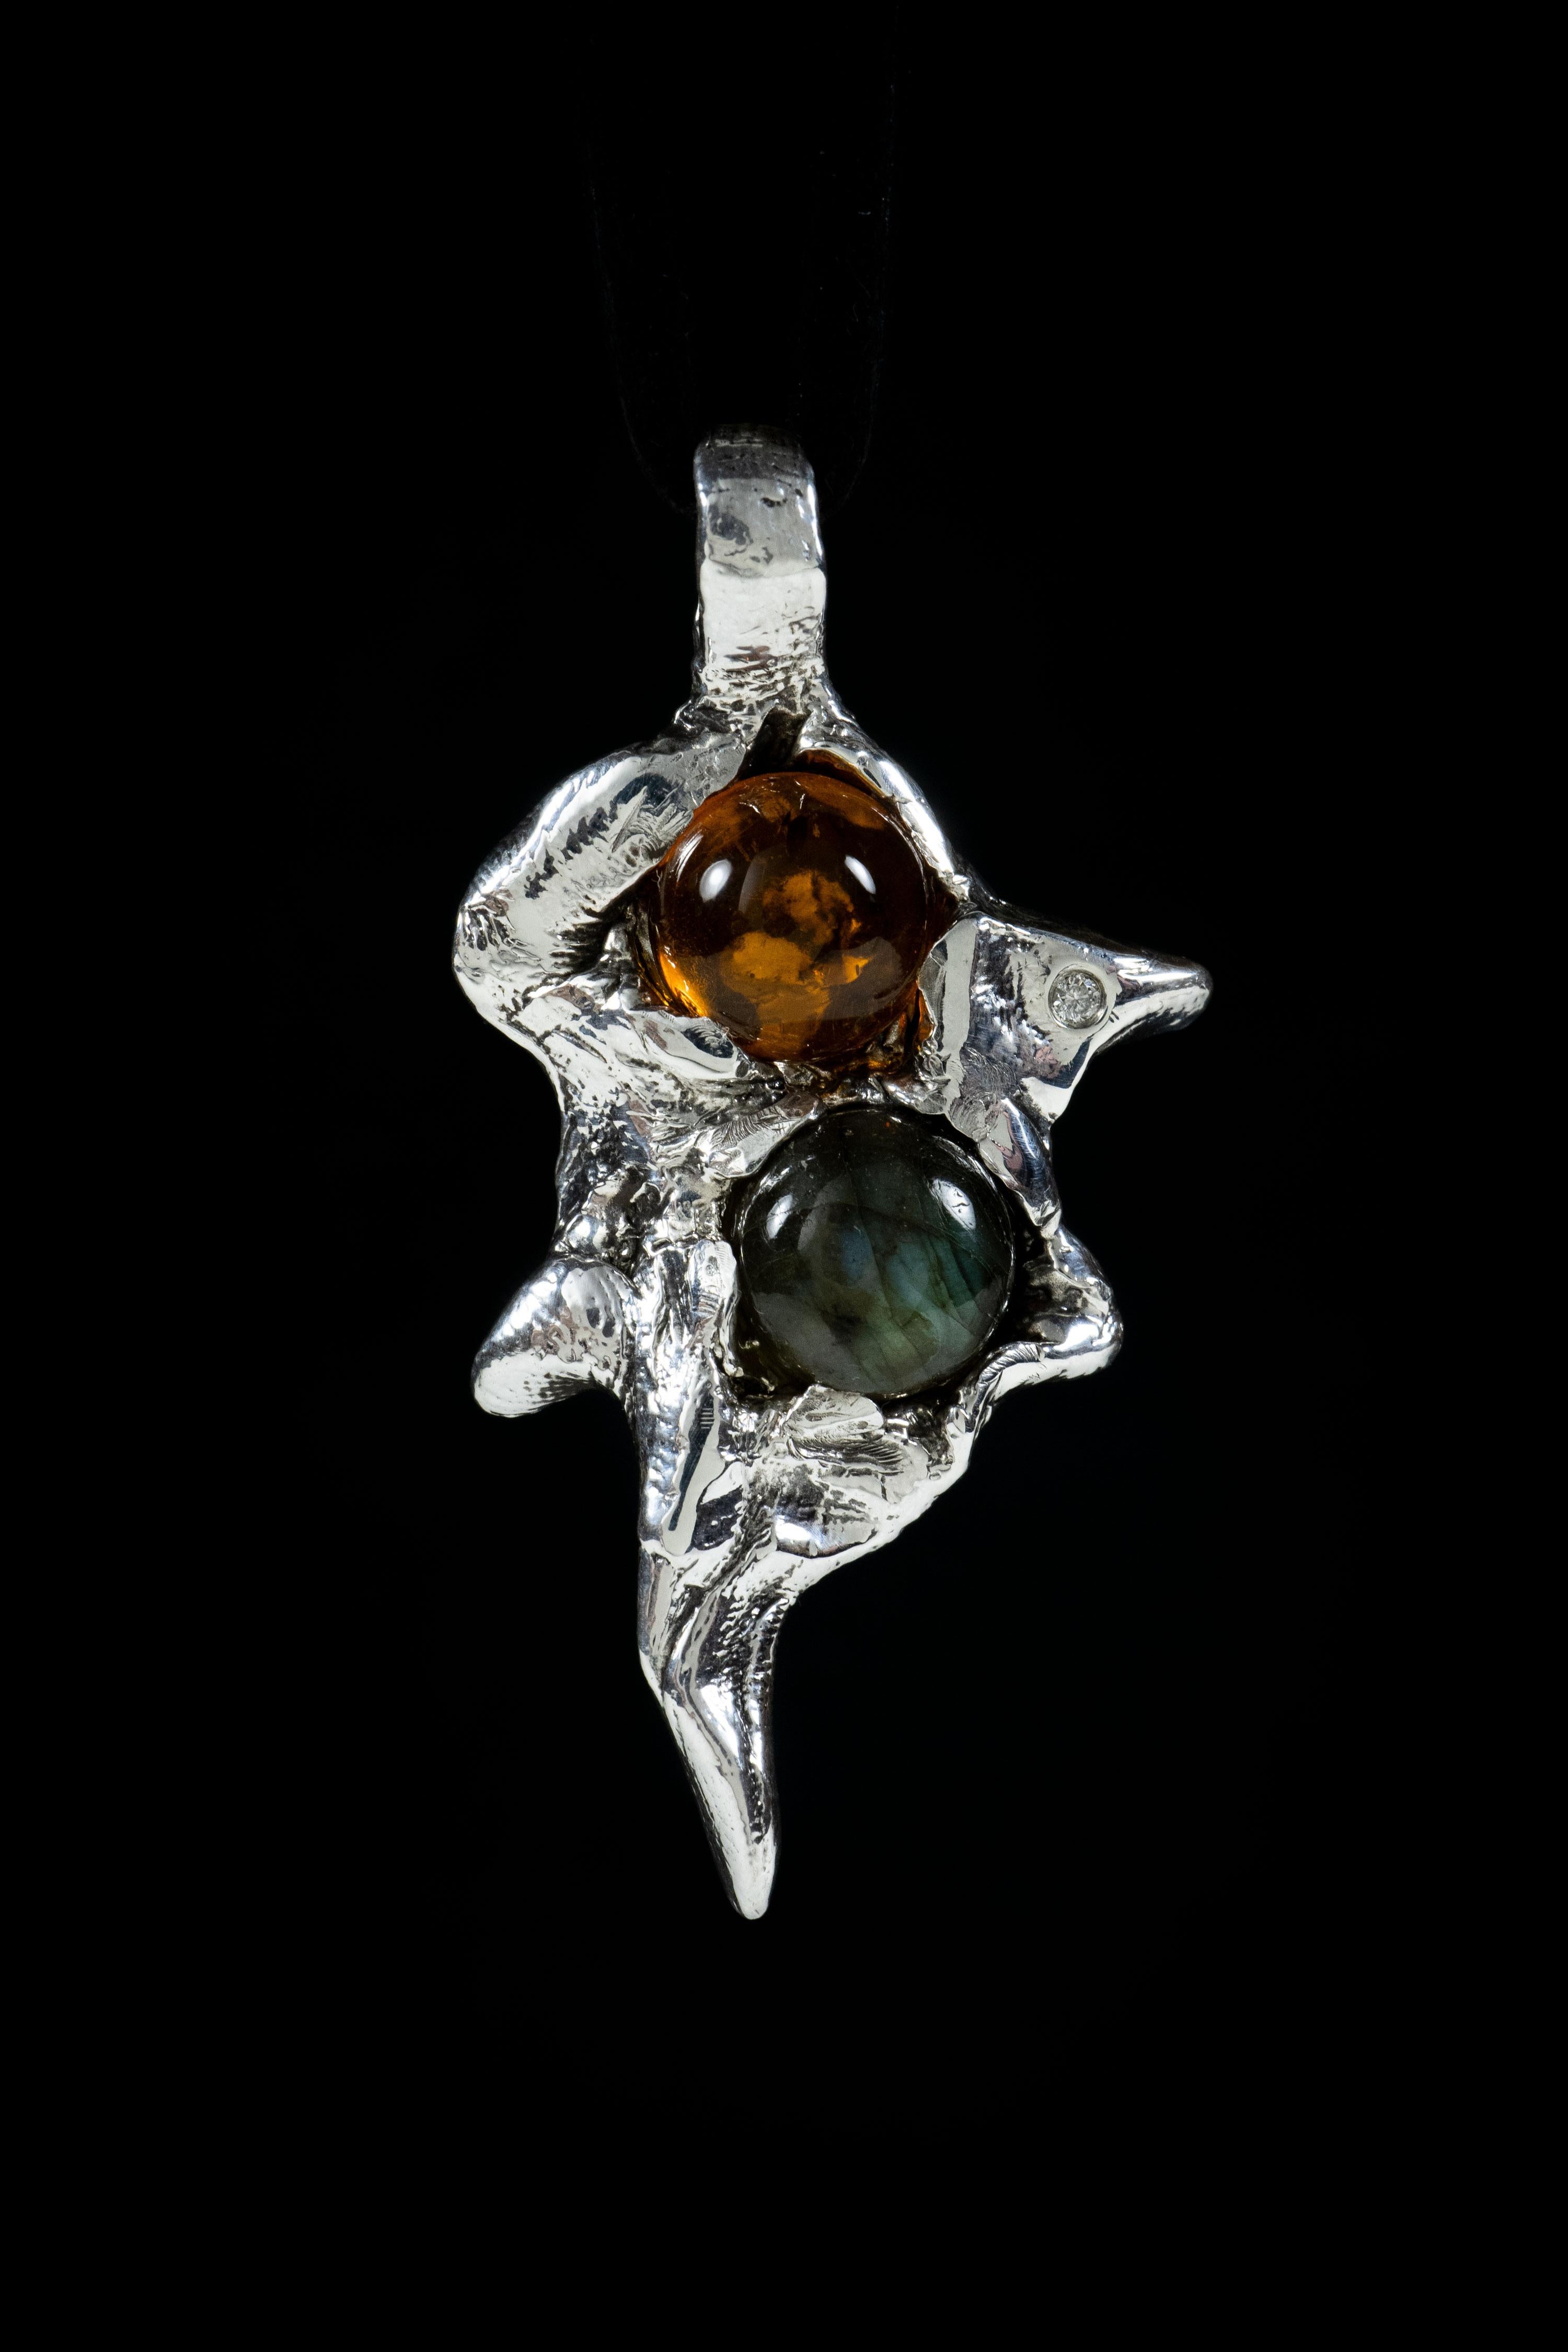 Fire and Water is a one-of-a-kind pendant by Ken Fury that is hand-carved and cast in sterling silver with amber, labradorite, and genuine diamond.

Metal: Sterling Silver

Stones: Amber, Labradorite, and Genuine Diamond.

Size: 32mm x